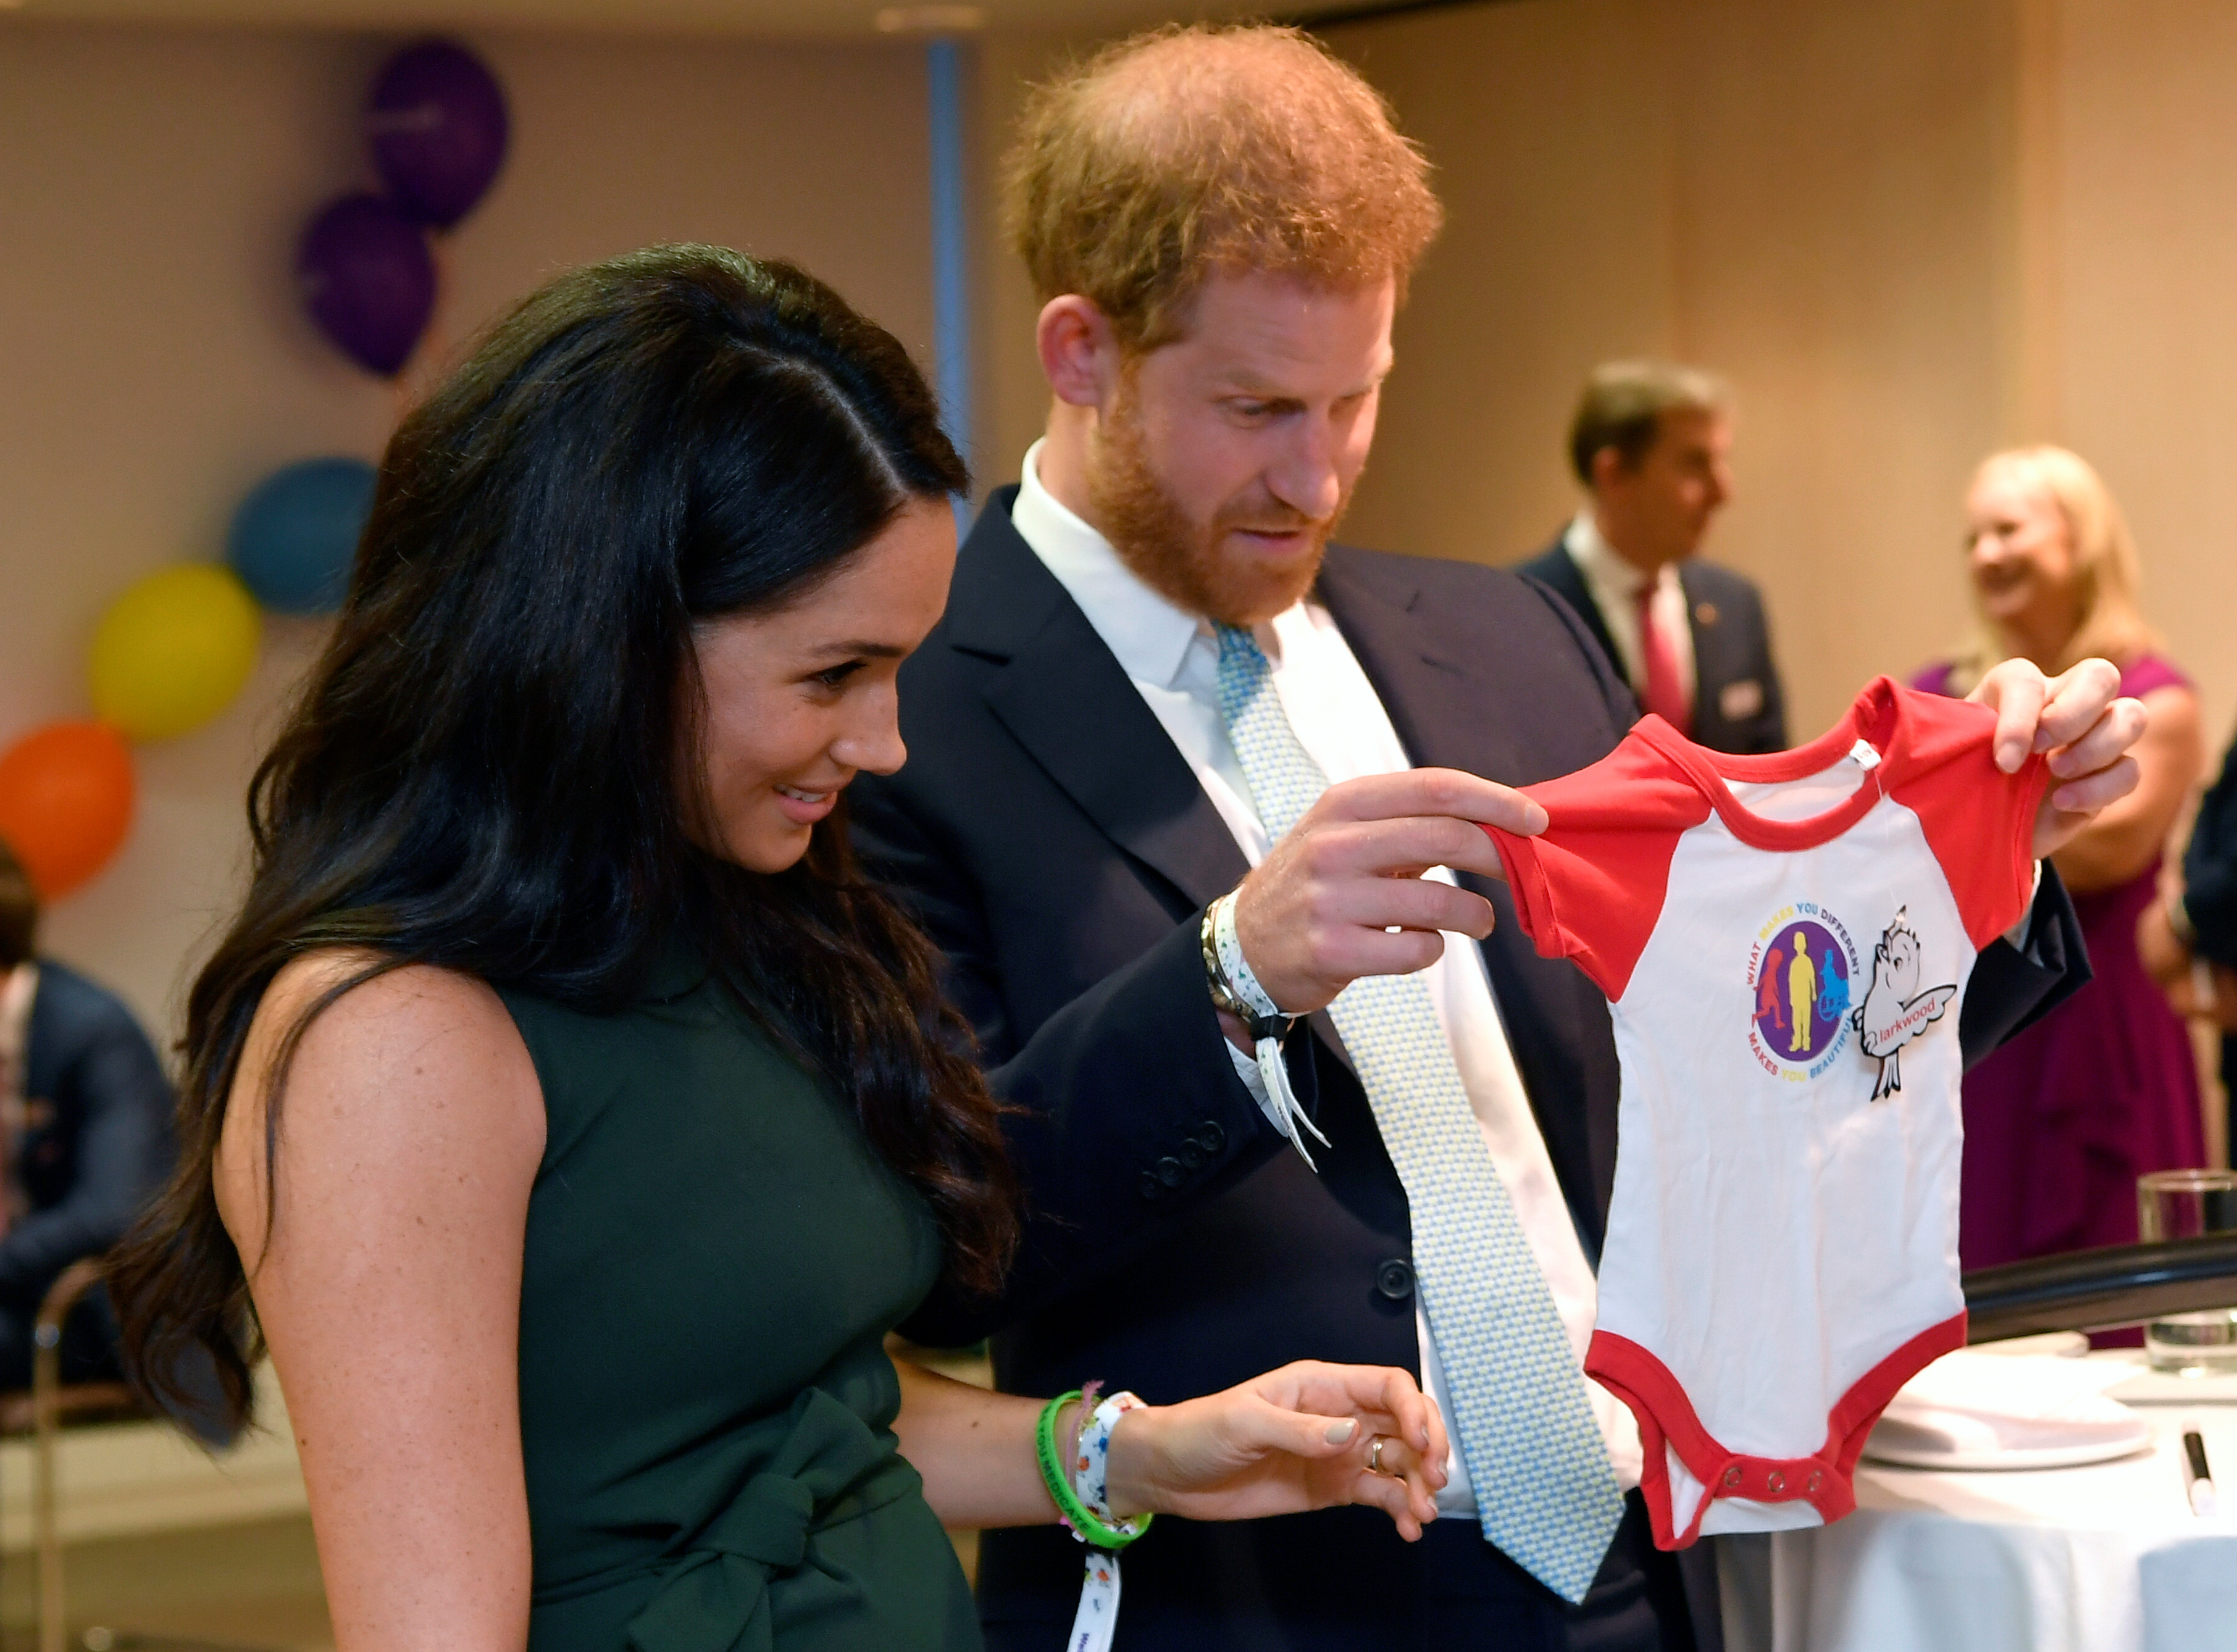 Prince Harry, Duke of Sussex and Meghan, Duchess of Sussex view a gift for their son Archie as they attend the WellChild awards in London, England, on October 15, 2019. | Source: Getty Images